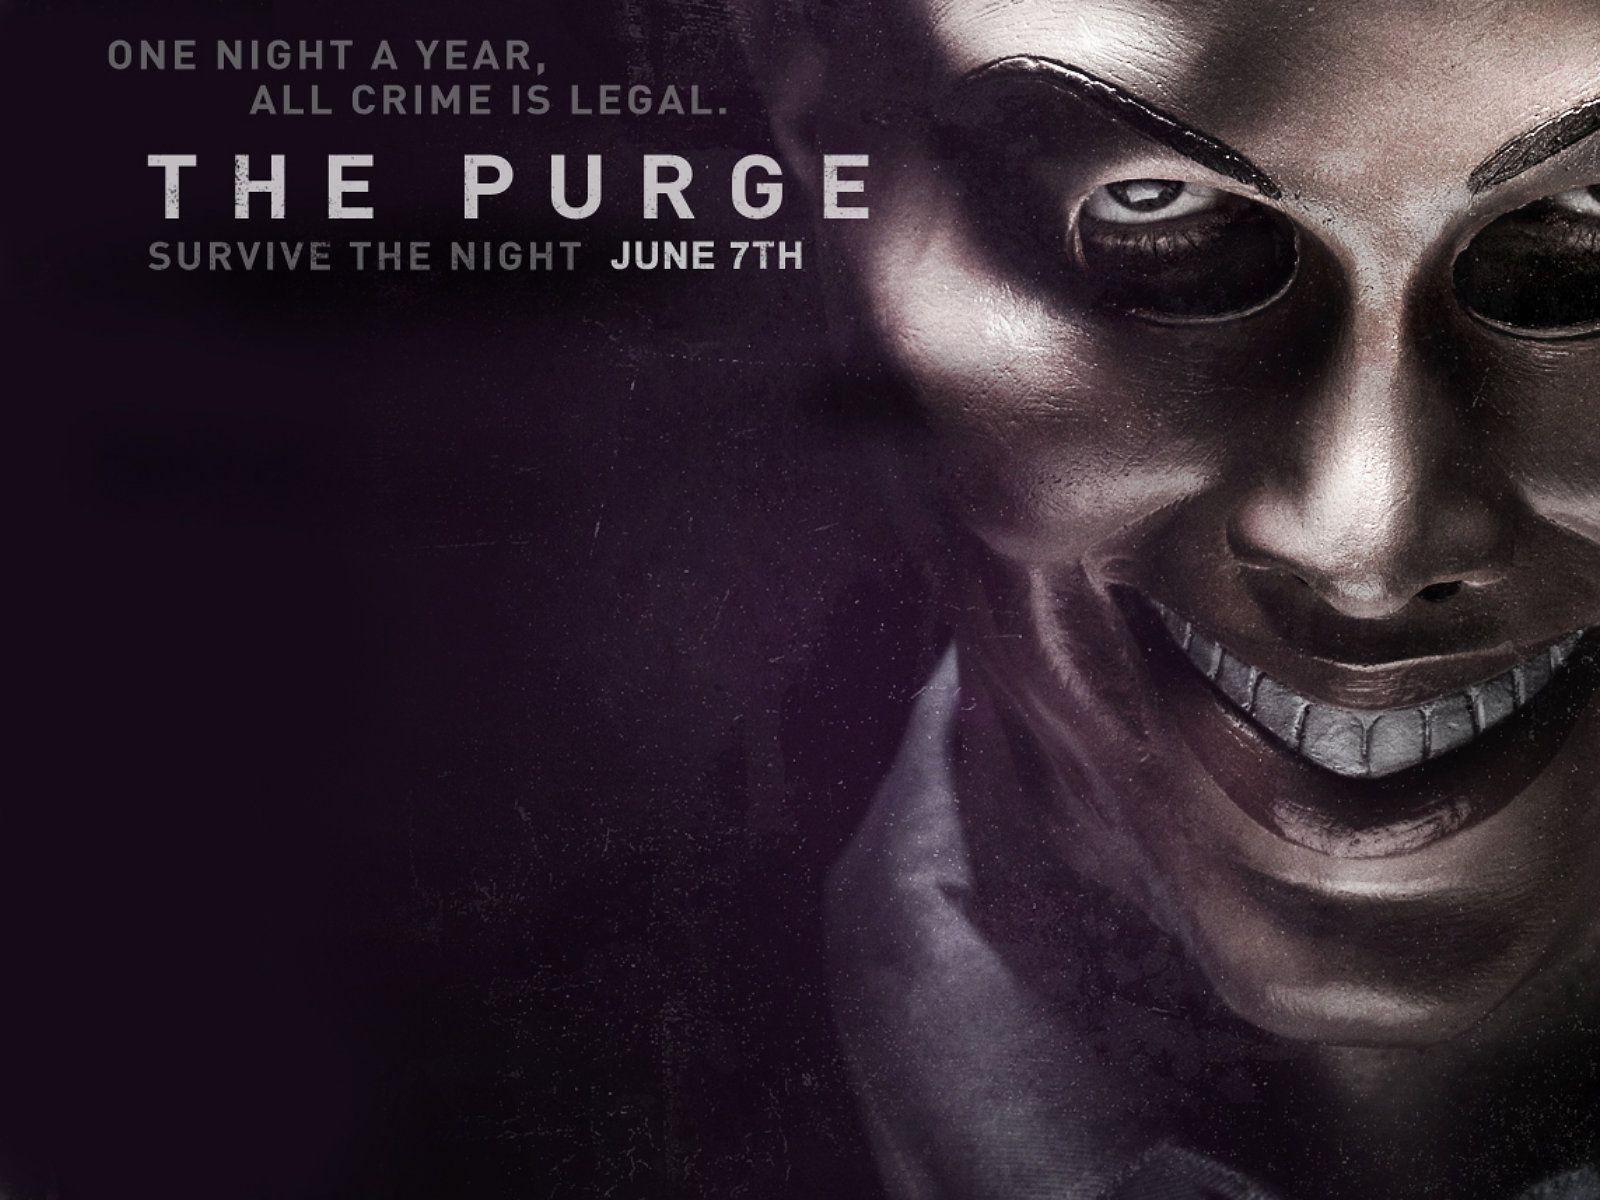 Bucks And Corn. Low Budget Film The Purge Surprises At The Box Office